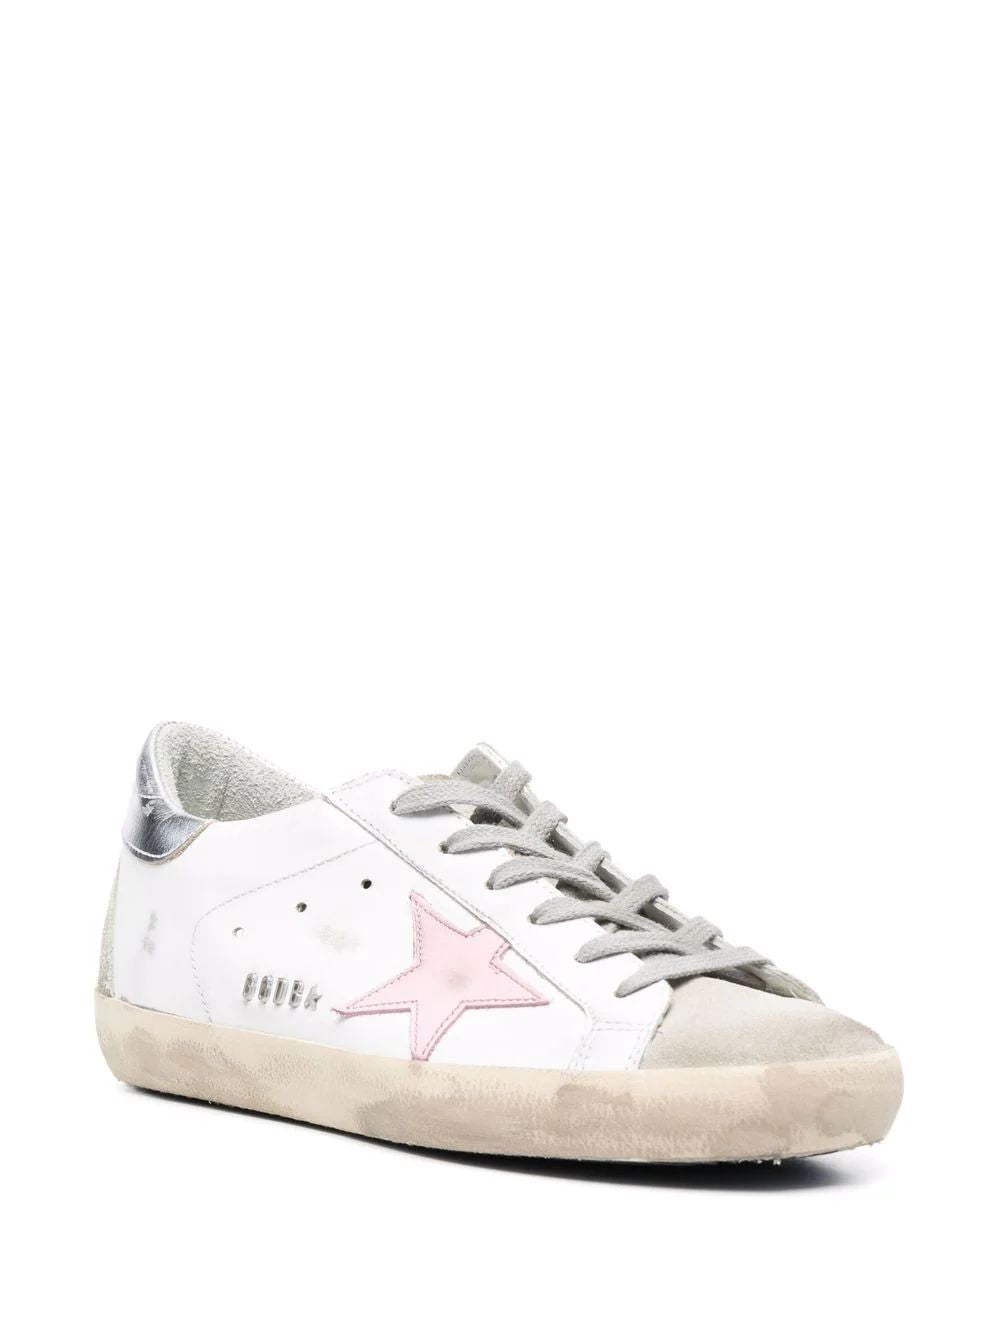 GOLDEN GOOSE Fashionable White and Pink Sneakers for Women